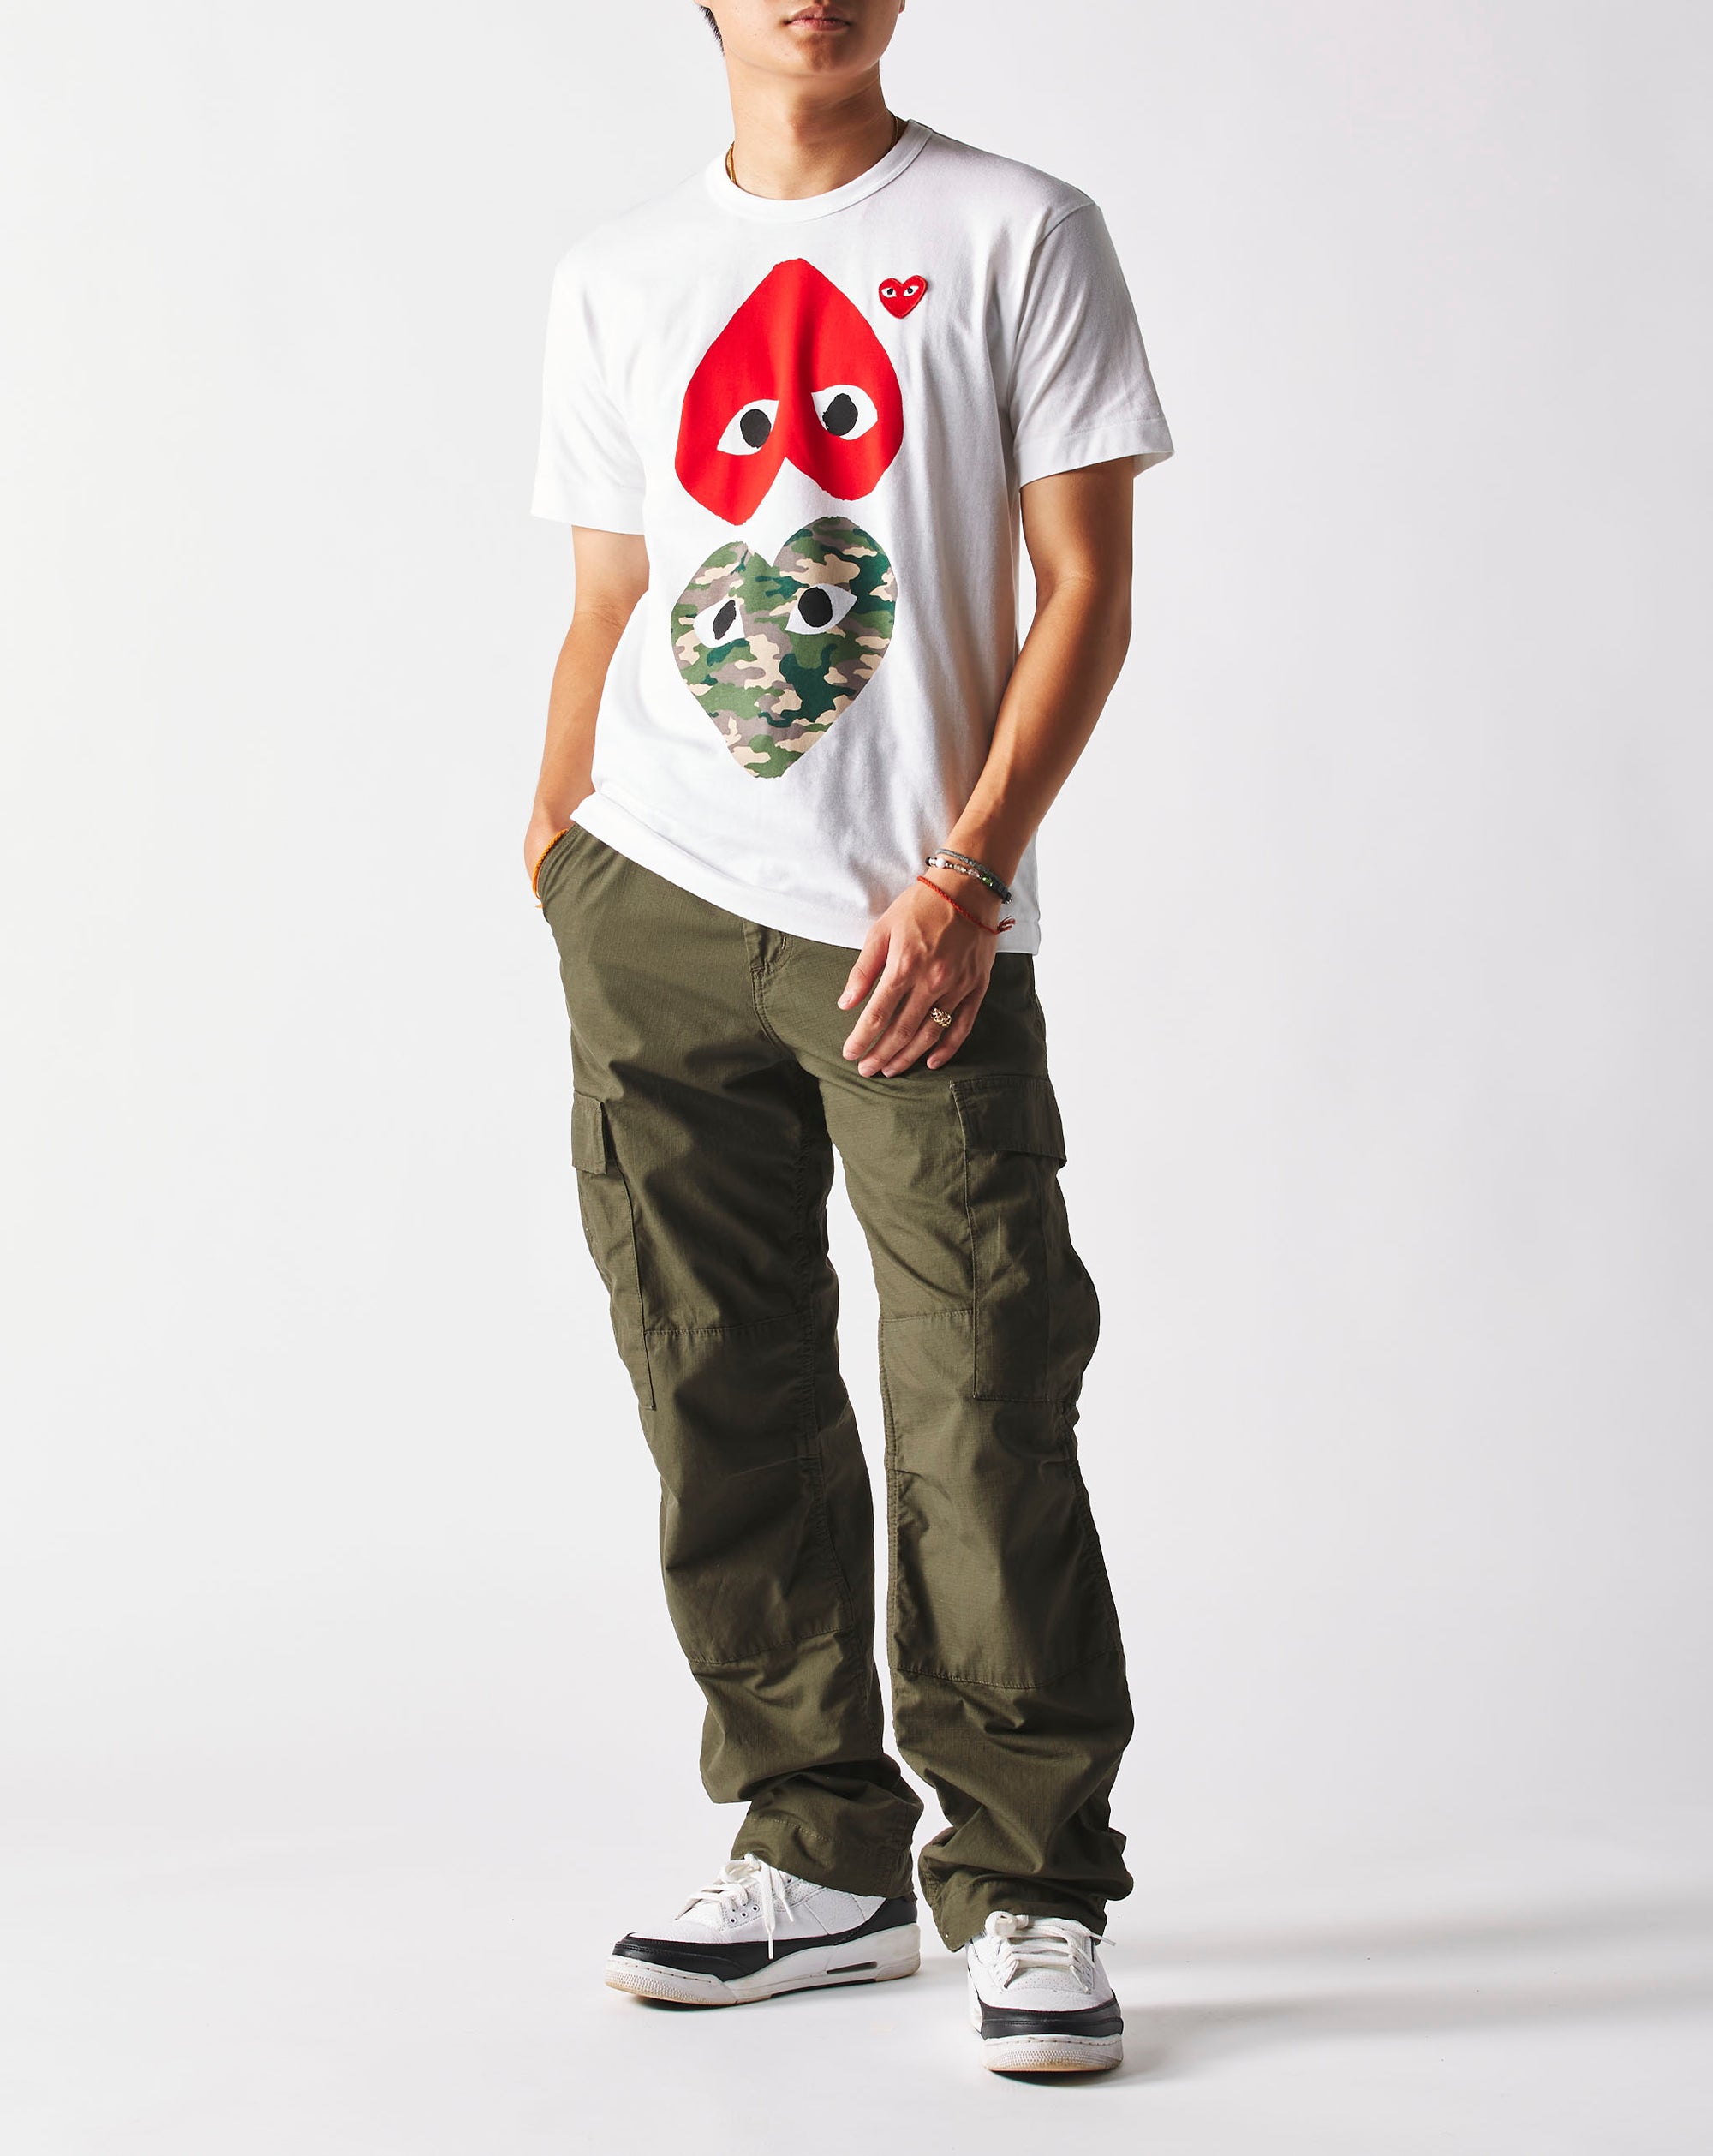 Comme des Garcons PLAY Double Heart T-Shirt - Rule of Next Apparel